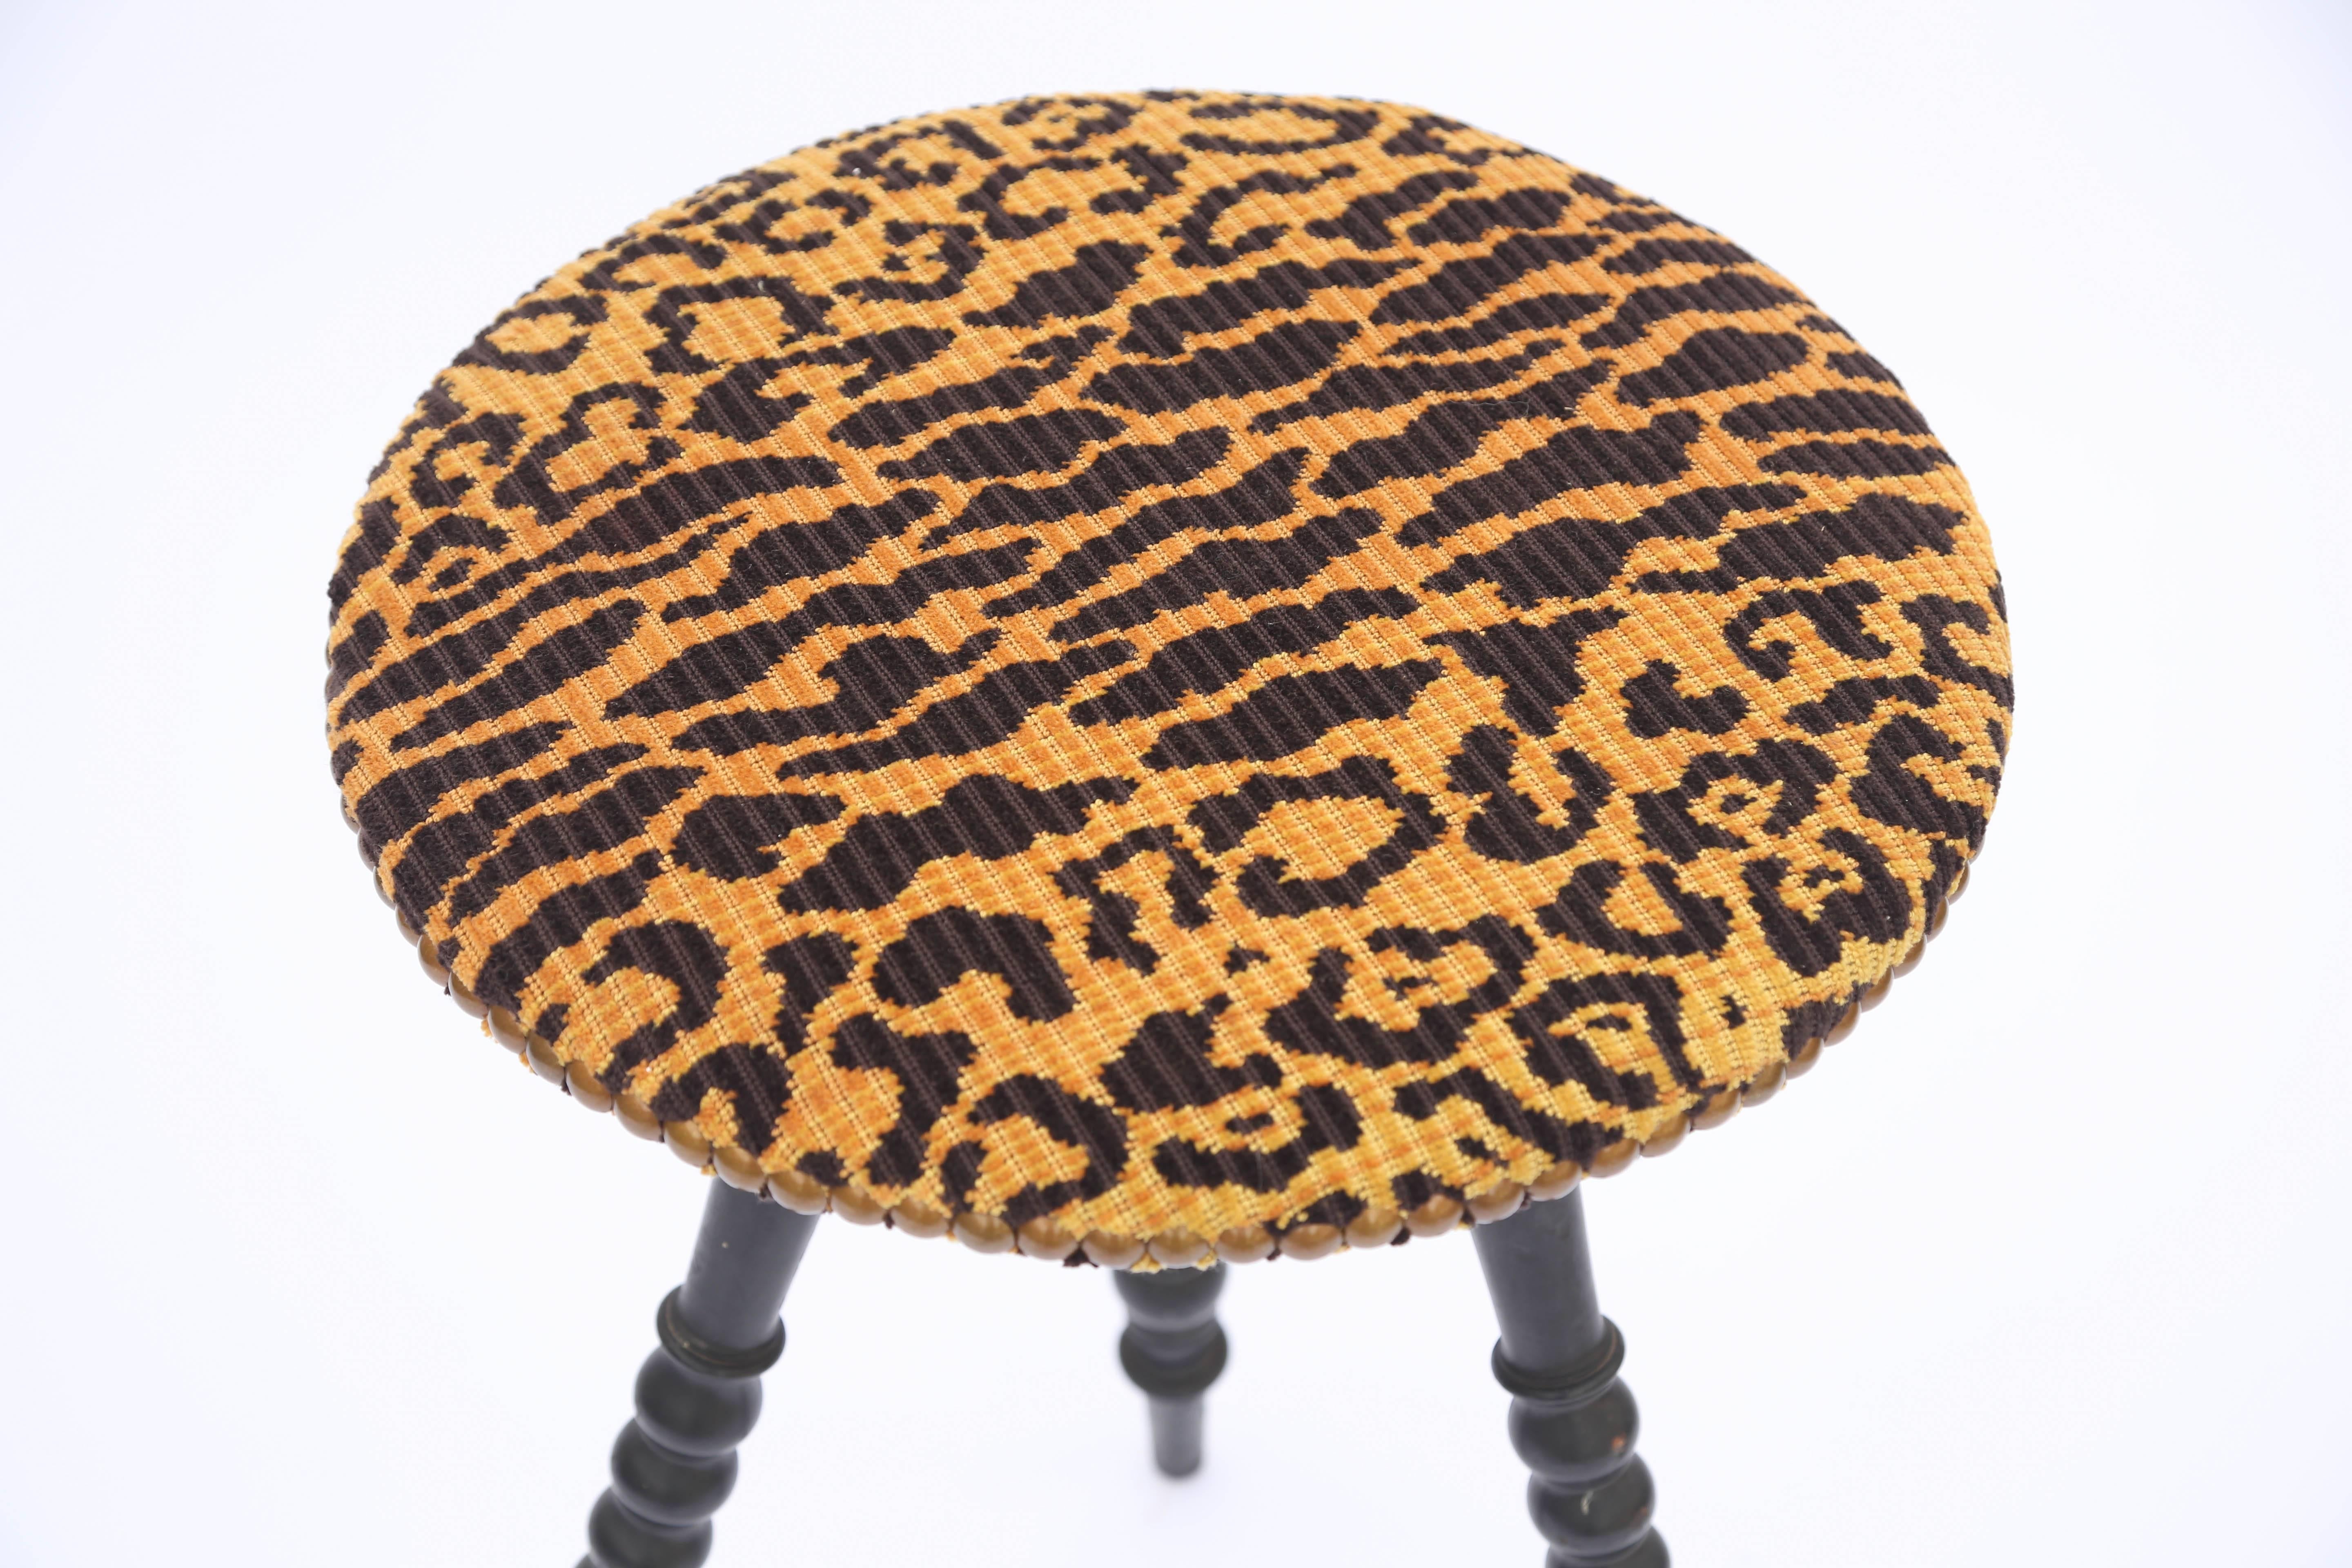 Great Britain (UK) Victorian Turned Leg Tripod Table with Upholstered Round Top in Leopard For Sale